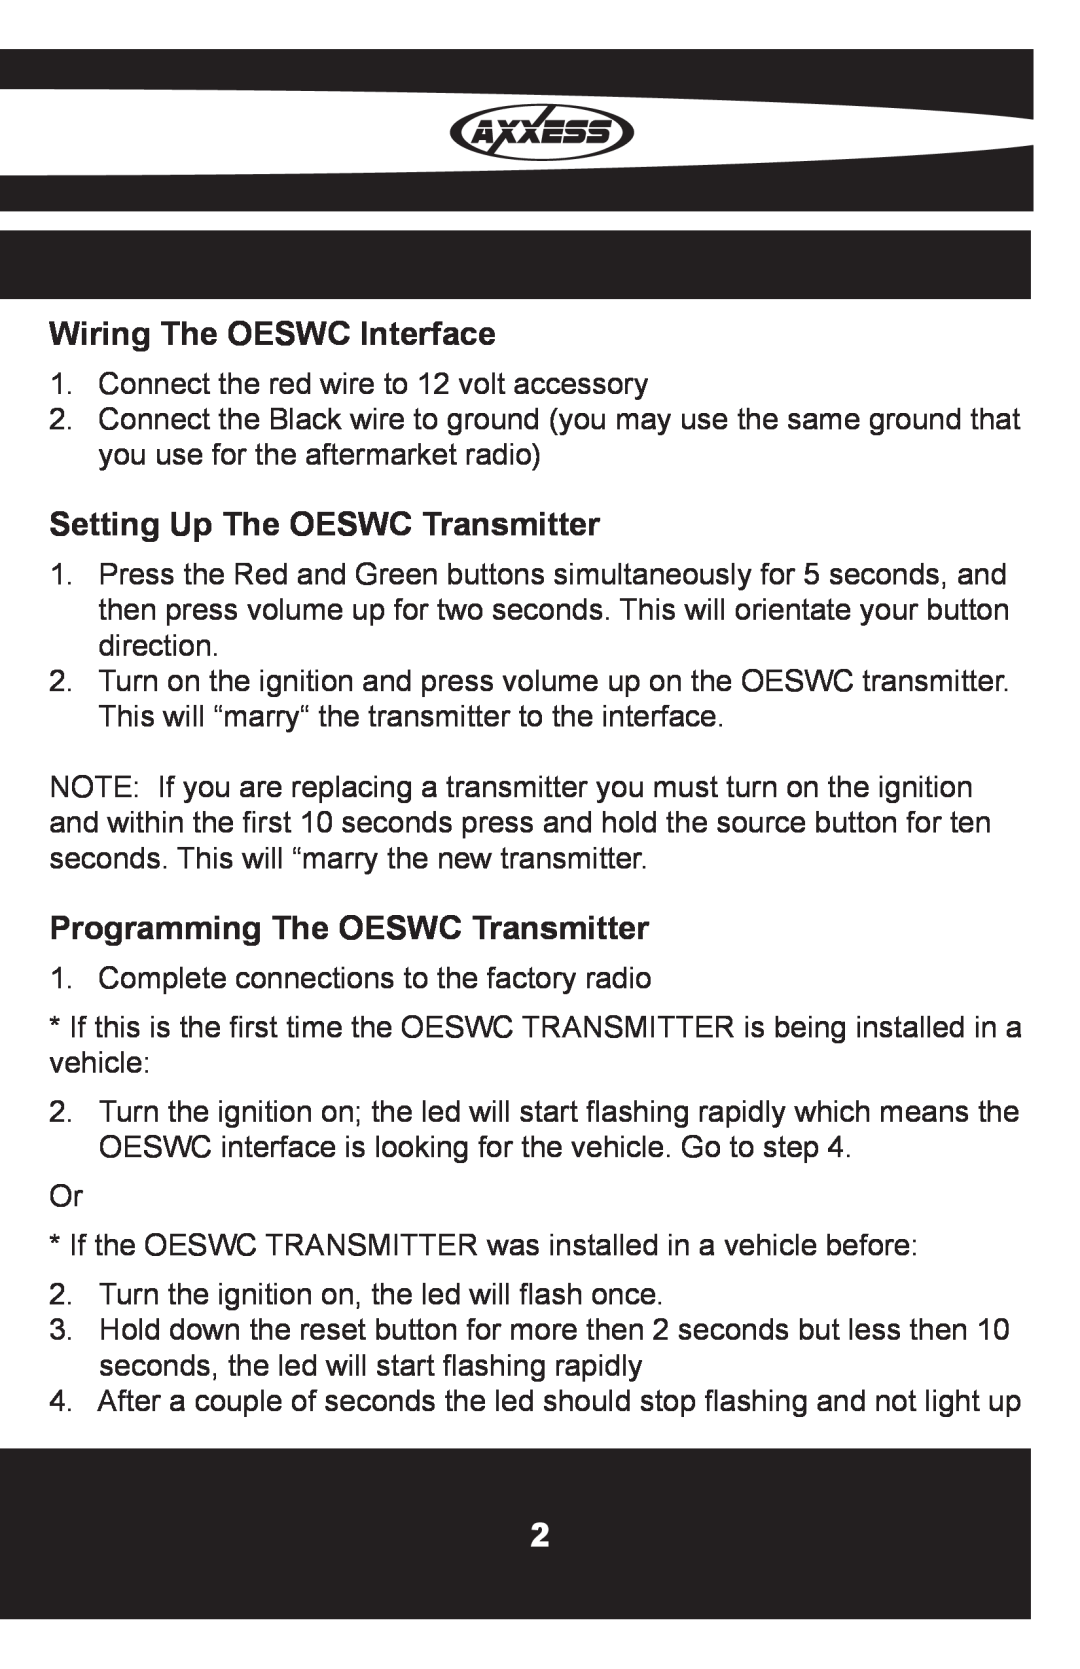 Axxess Interface OESWC-CLASS2-RF installation instructions Wiring The OESWC Interface, Setting Up The OESWC Transmitter 